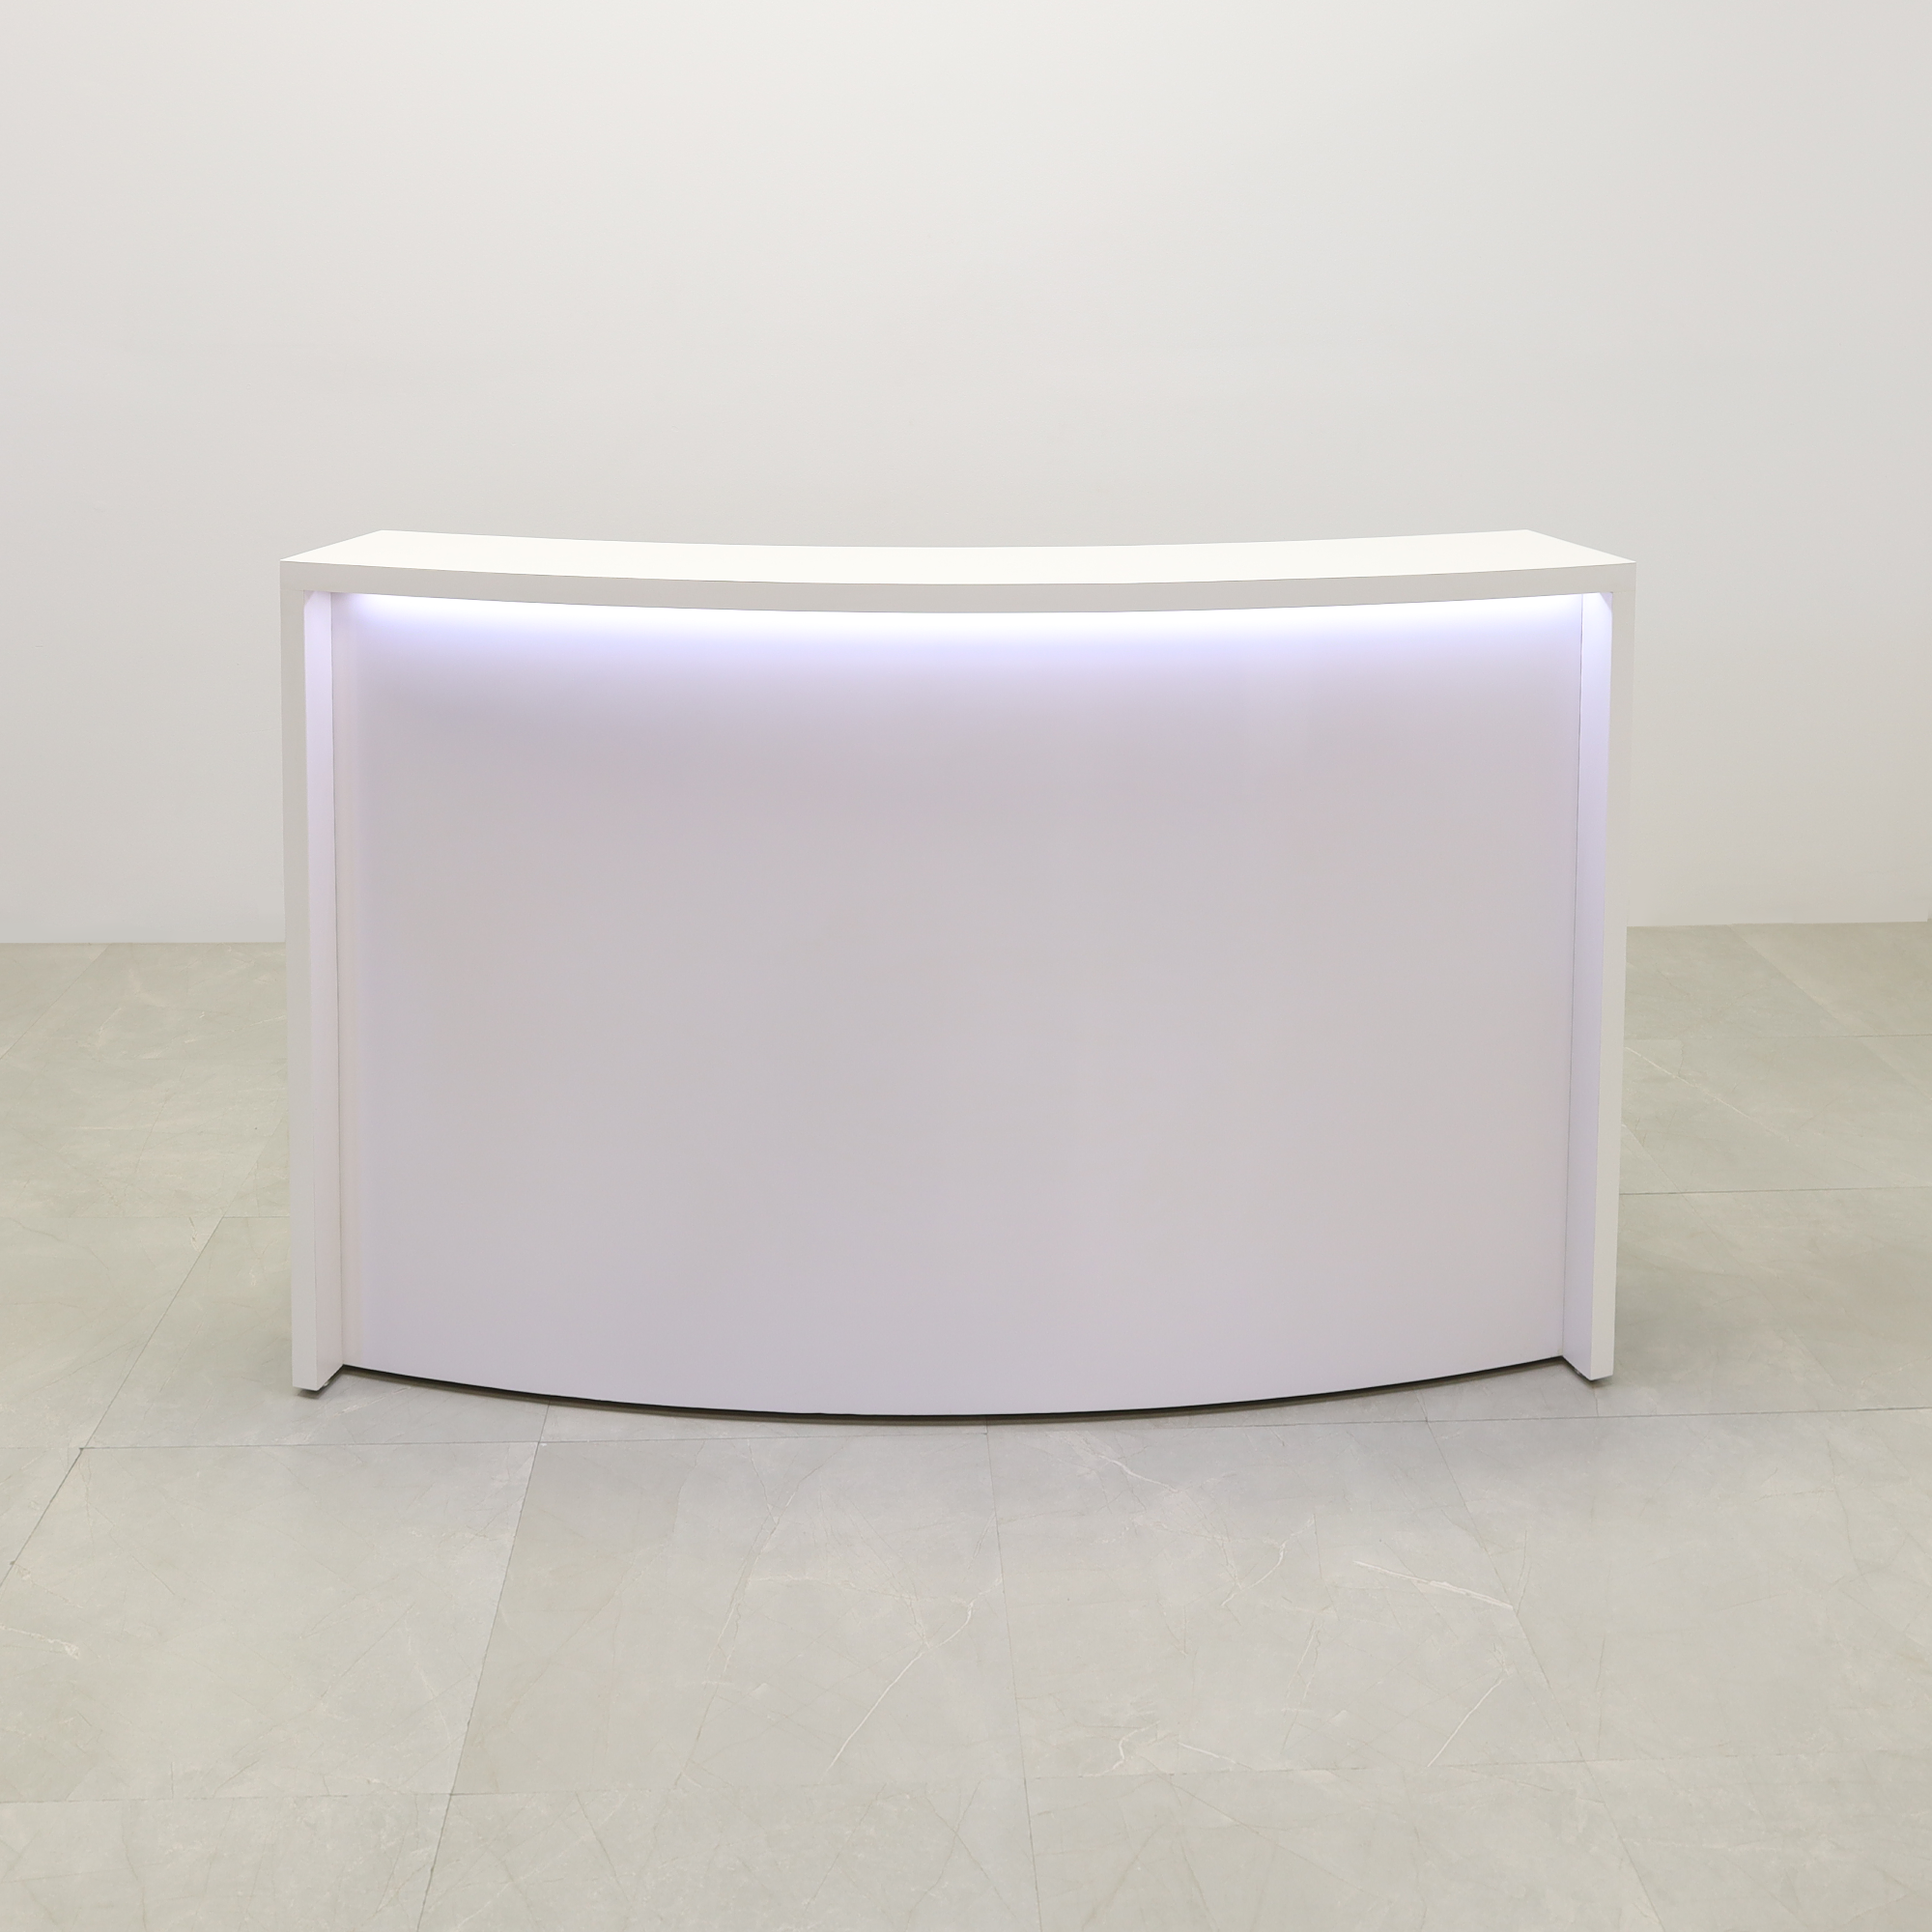 72-inch Seattle X1 Custom Reception Desk in white matte laminate desk and curved front panel, with white LED, shown here.